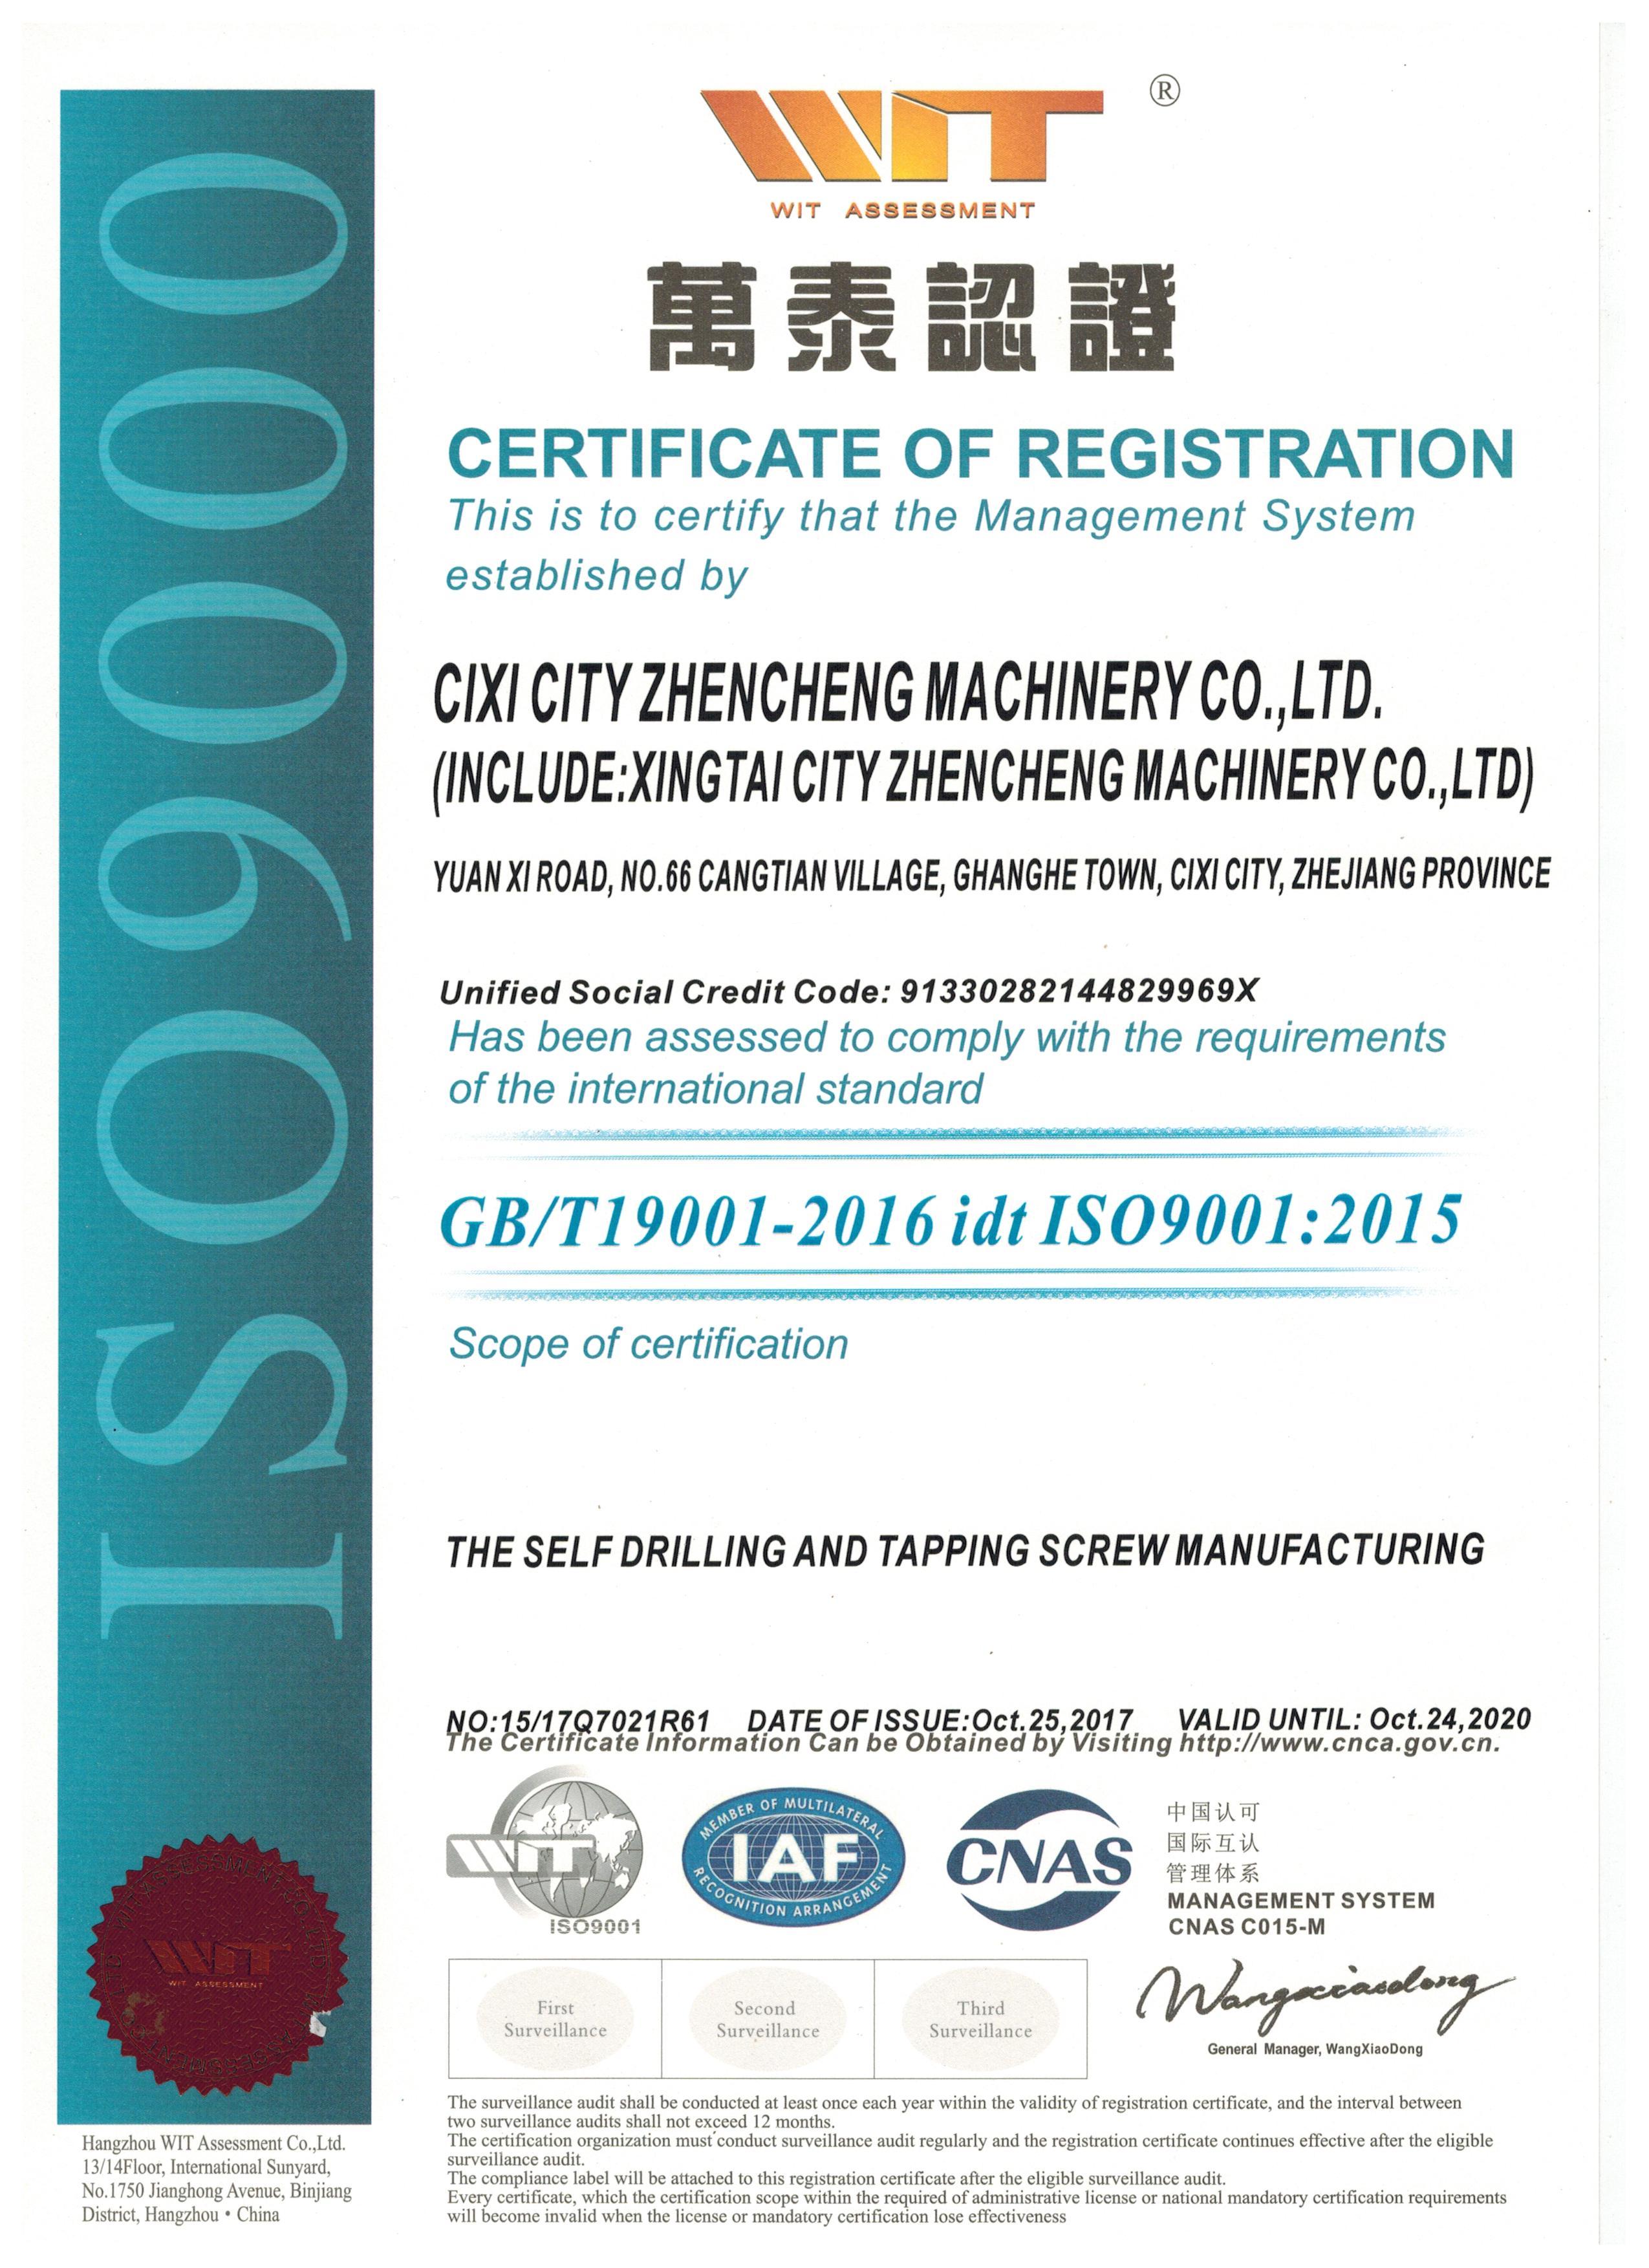 ISO9000証明書